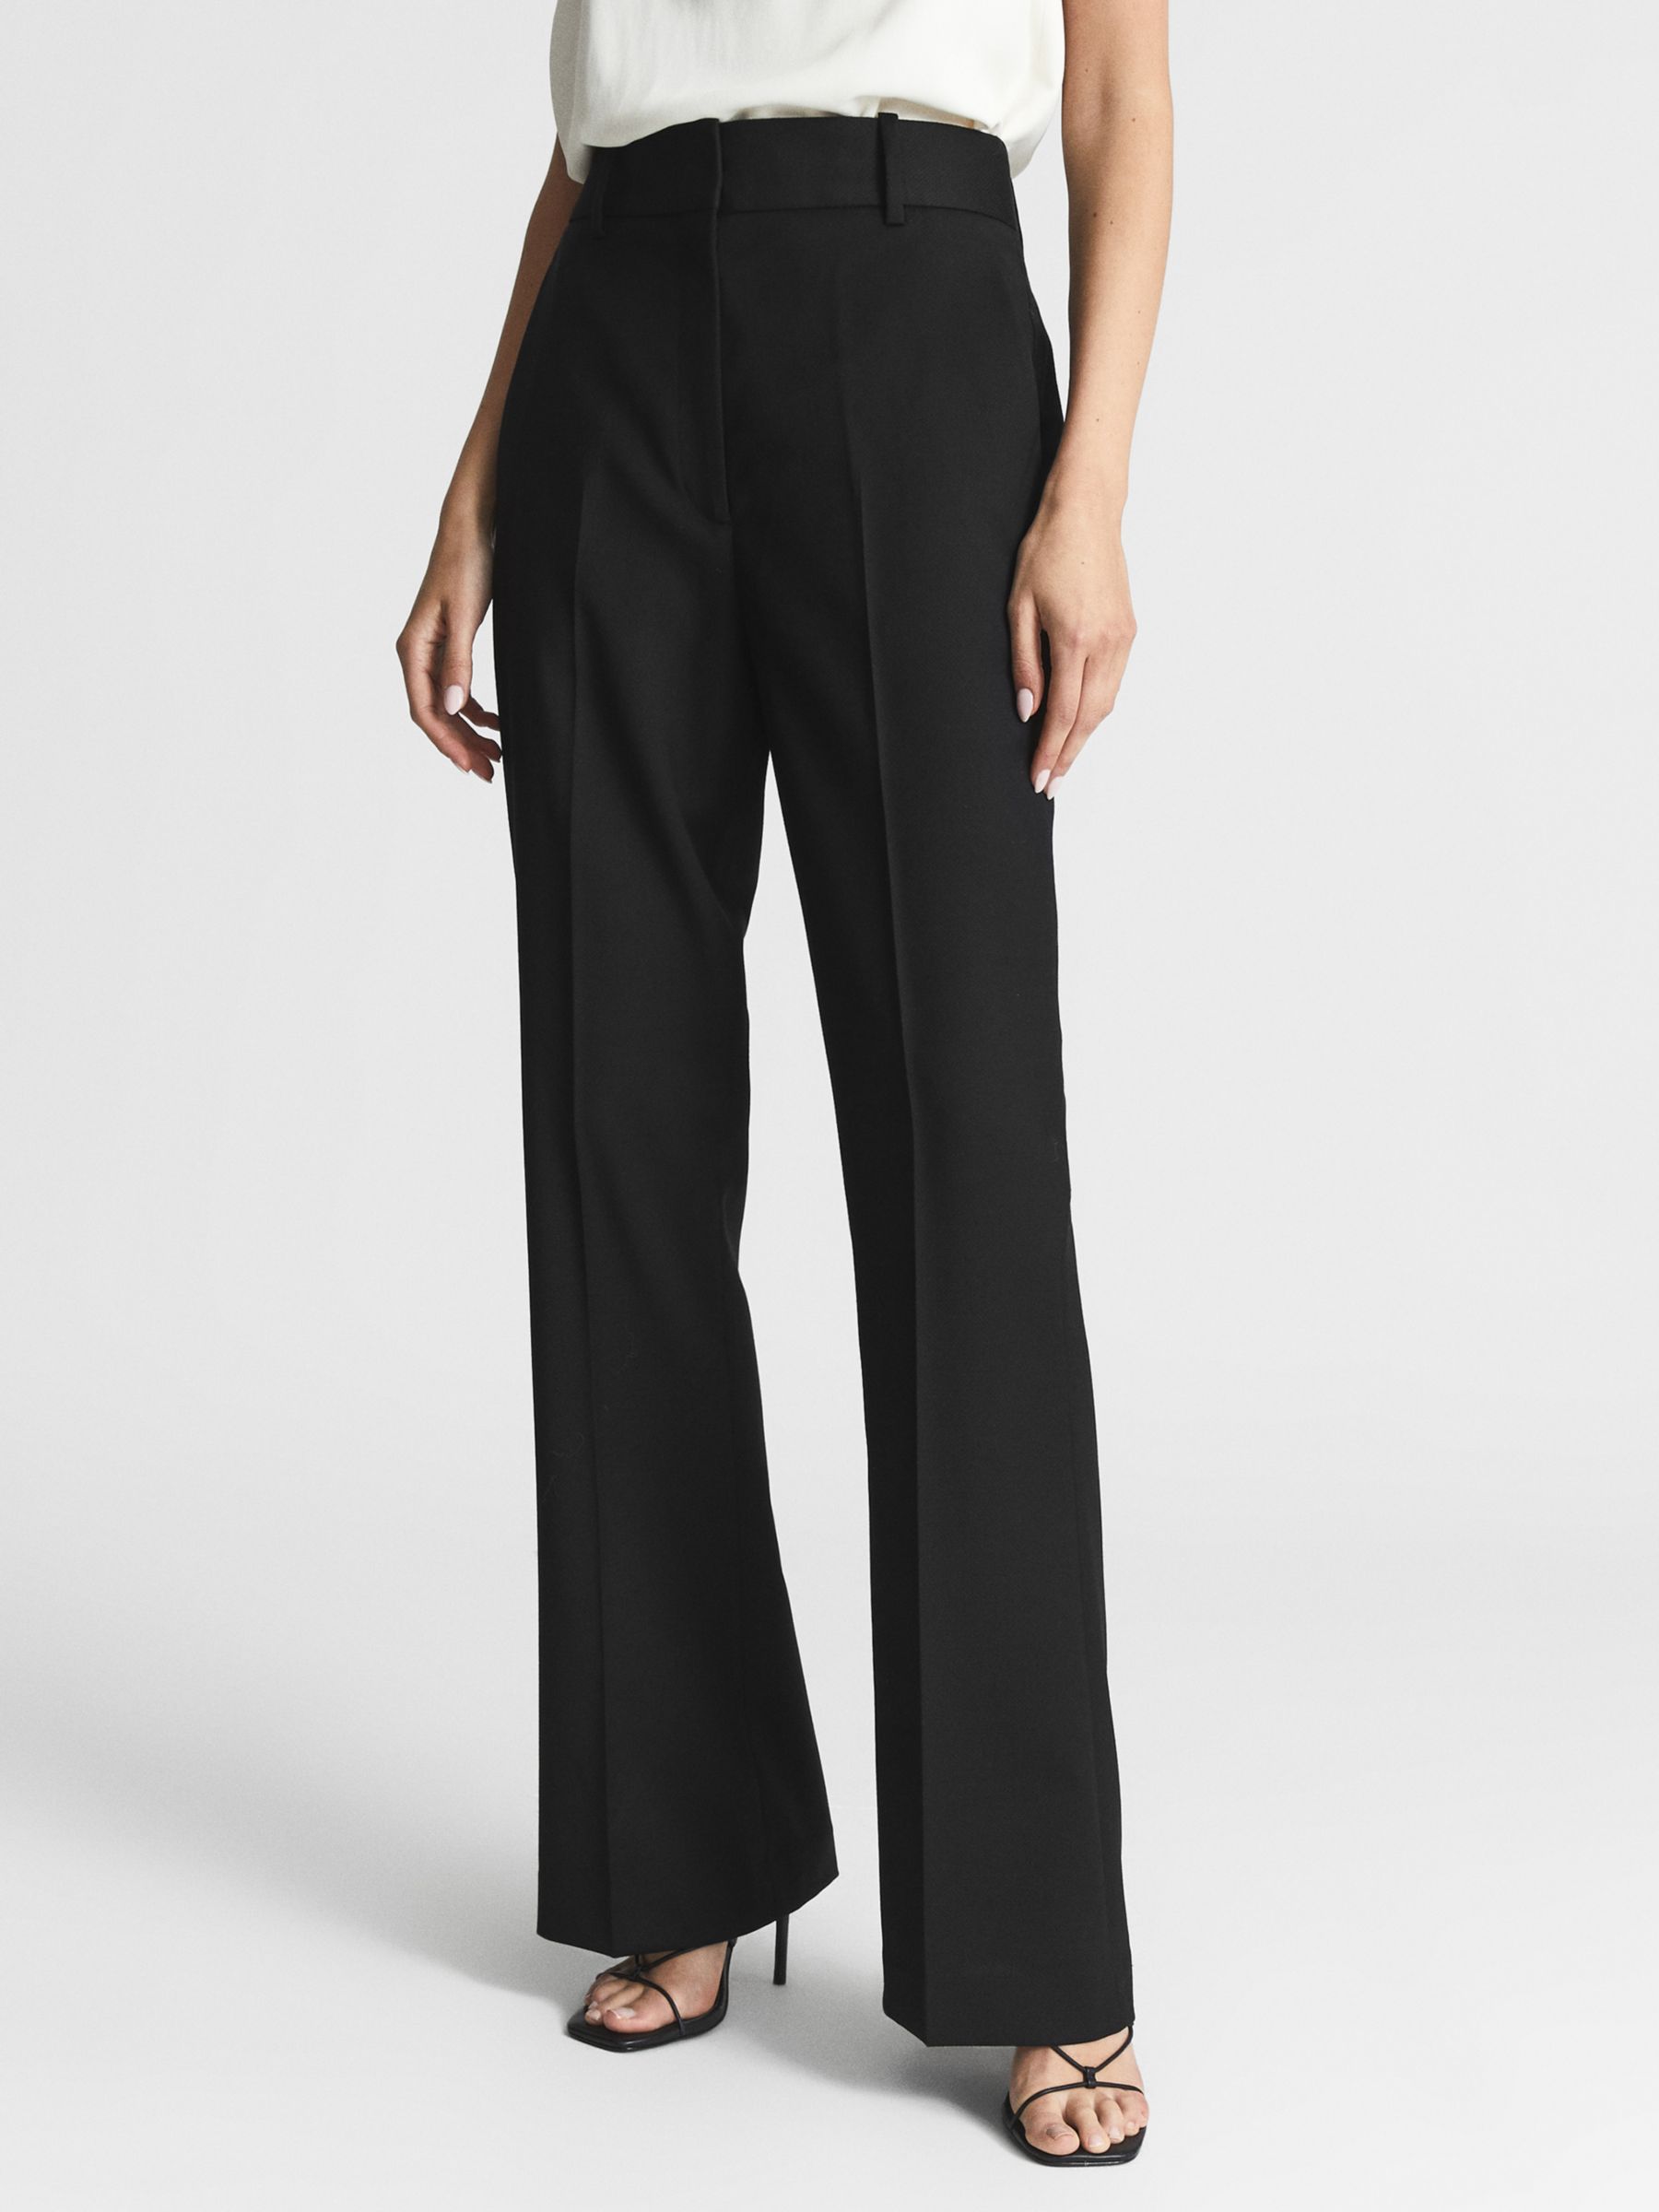 Reiss Haisley Tailored Flare Trousers, Black at John Lewis & Partners